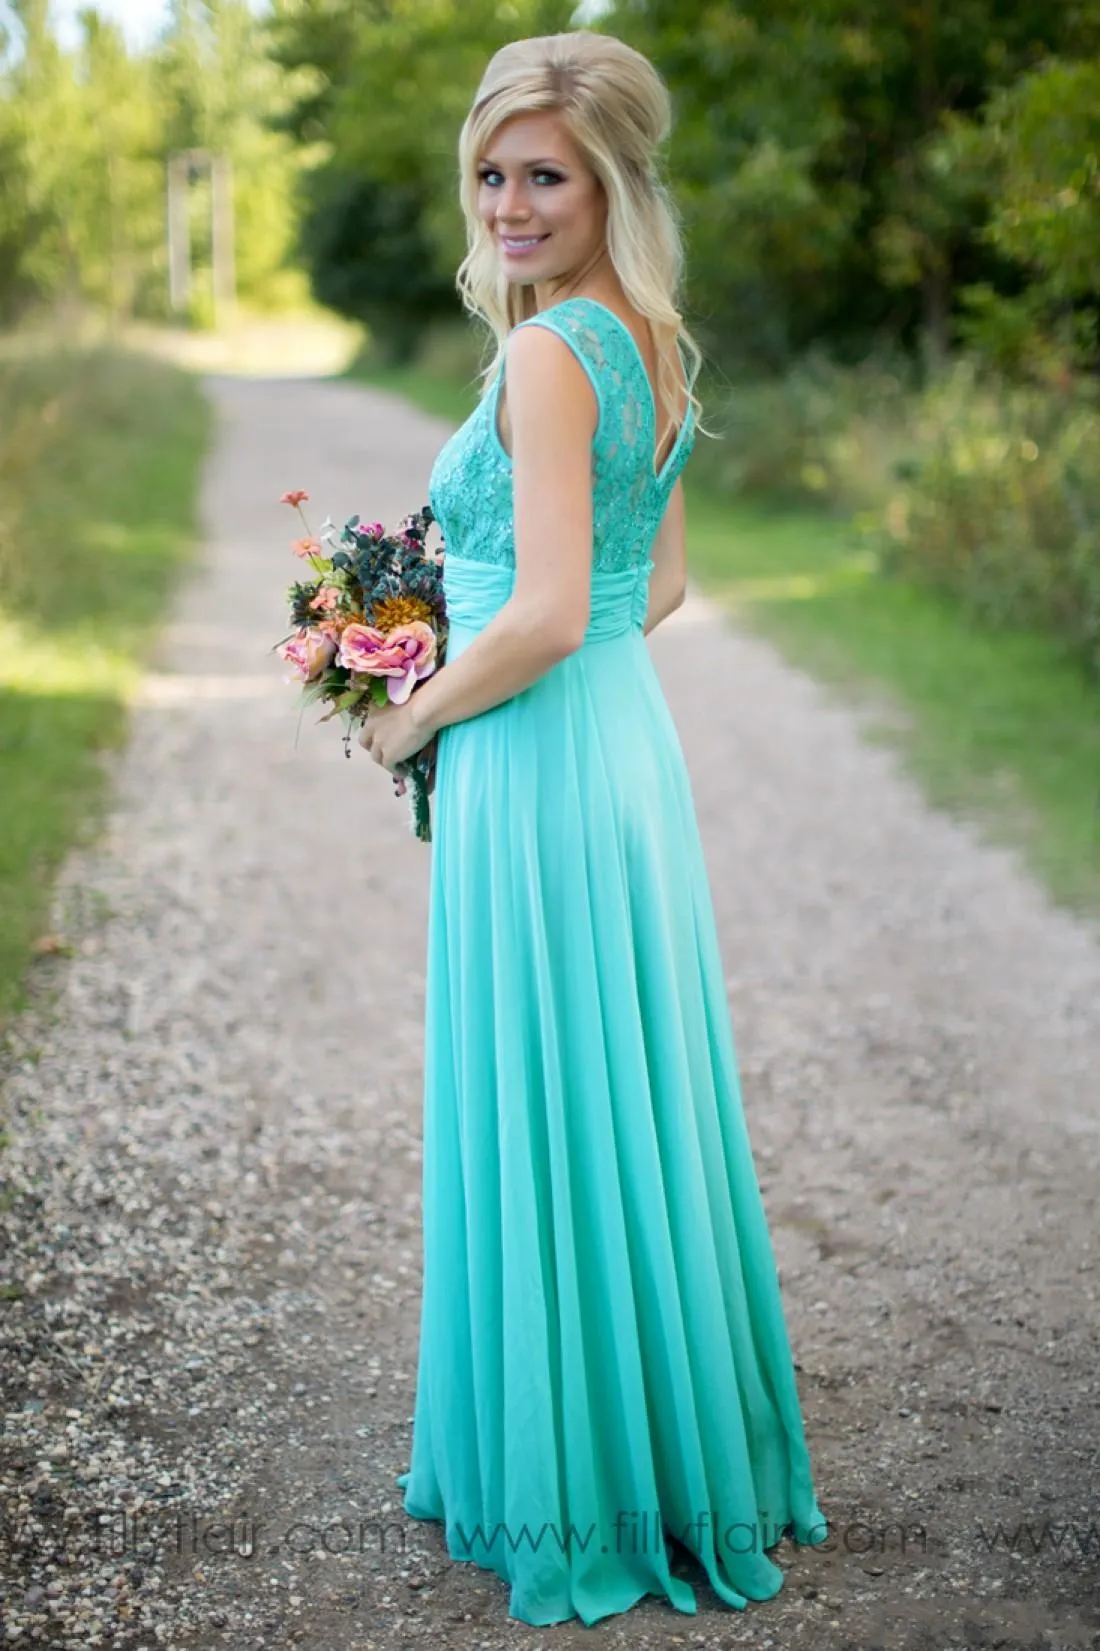 Turquoise Sheer Jewel Neck Chiffon Sheath Bridesmaid Dresses Sequins Lace Long Country Bridesmaid Maid of Honor Wedding Guest 243J